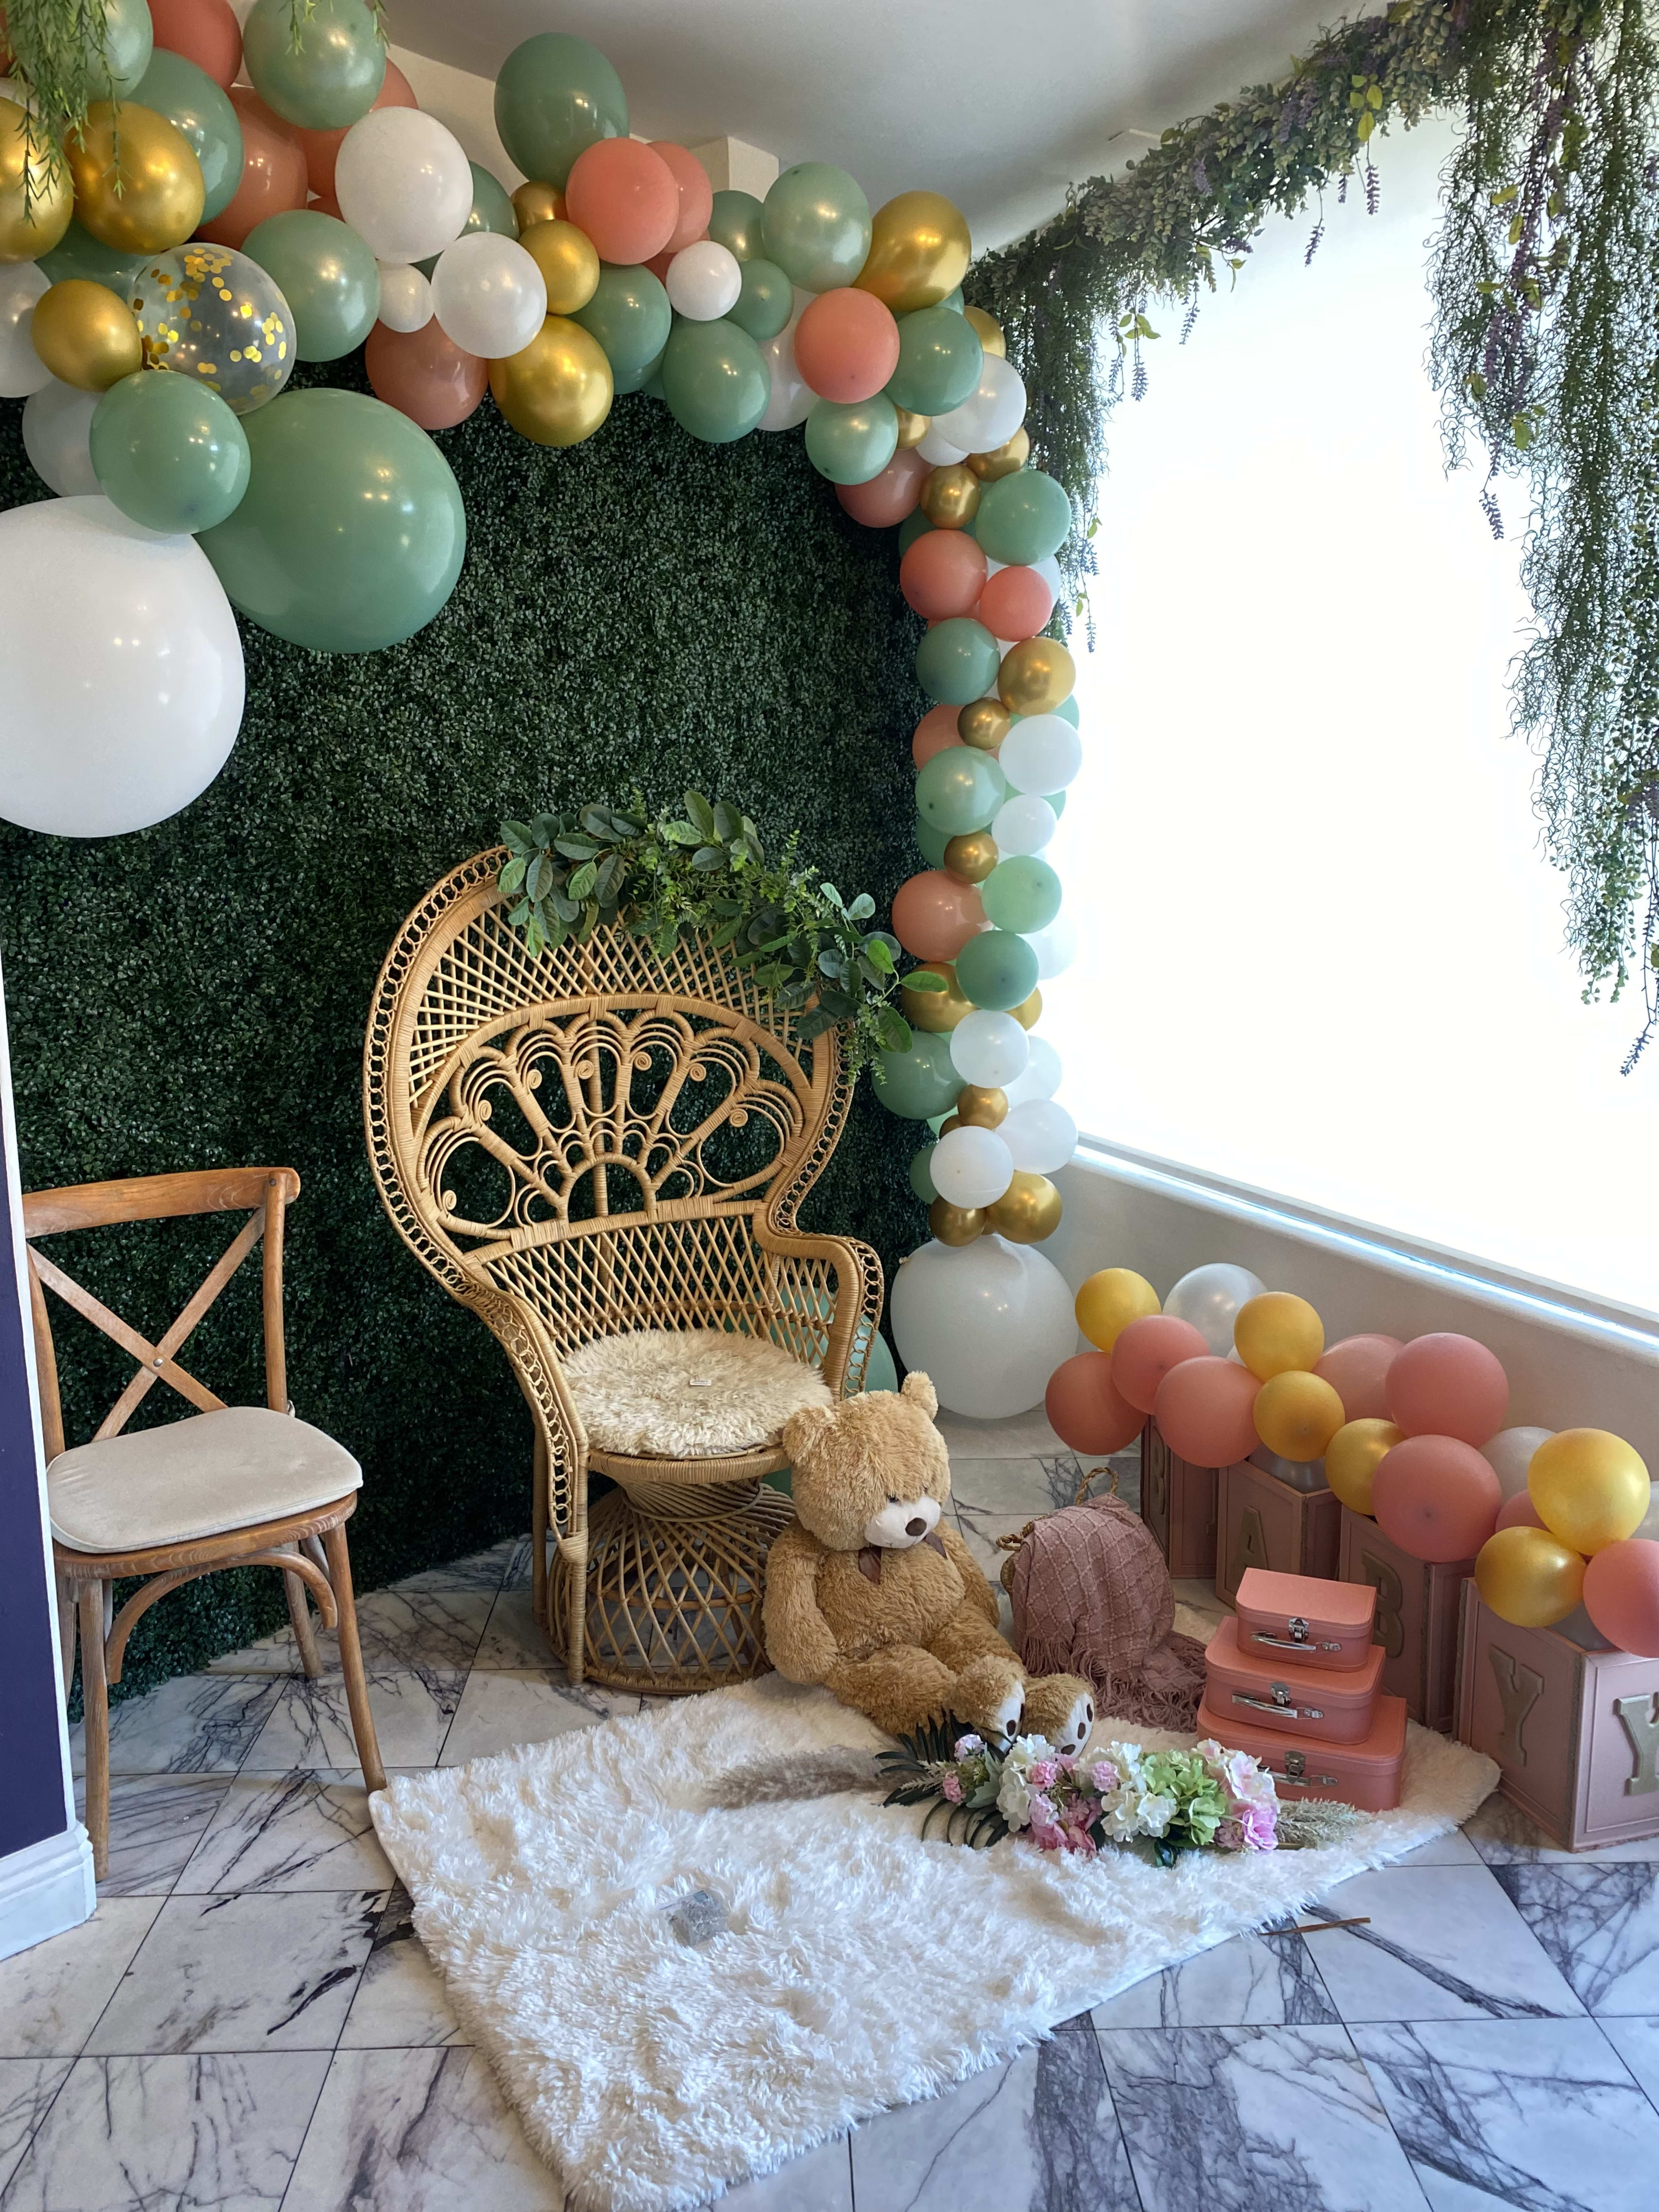 A teddy bear sits in front of a boho chair amidst green plants and beige balloons at a gender-neutral baby shower.